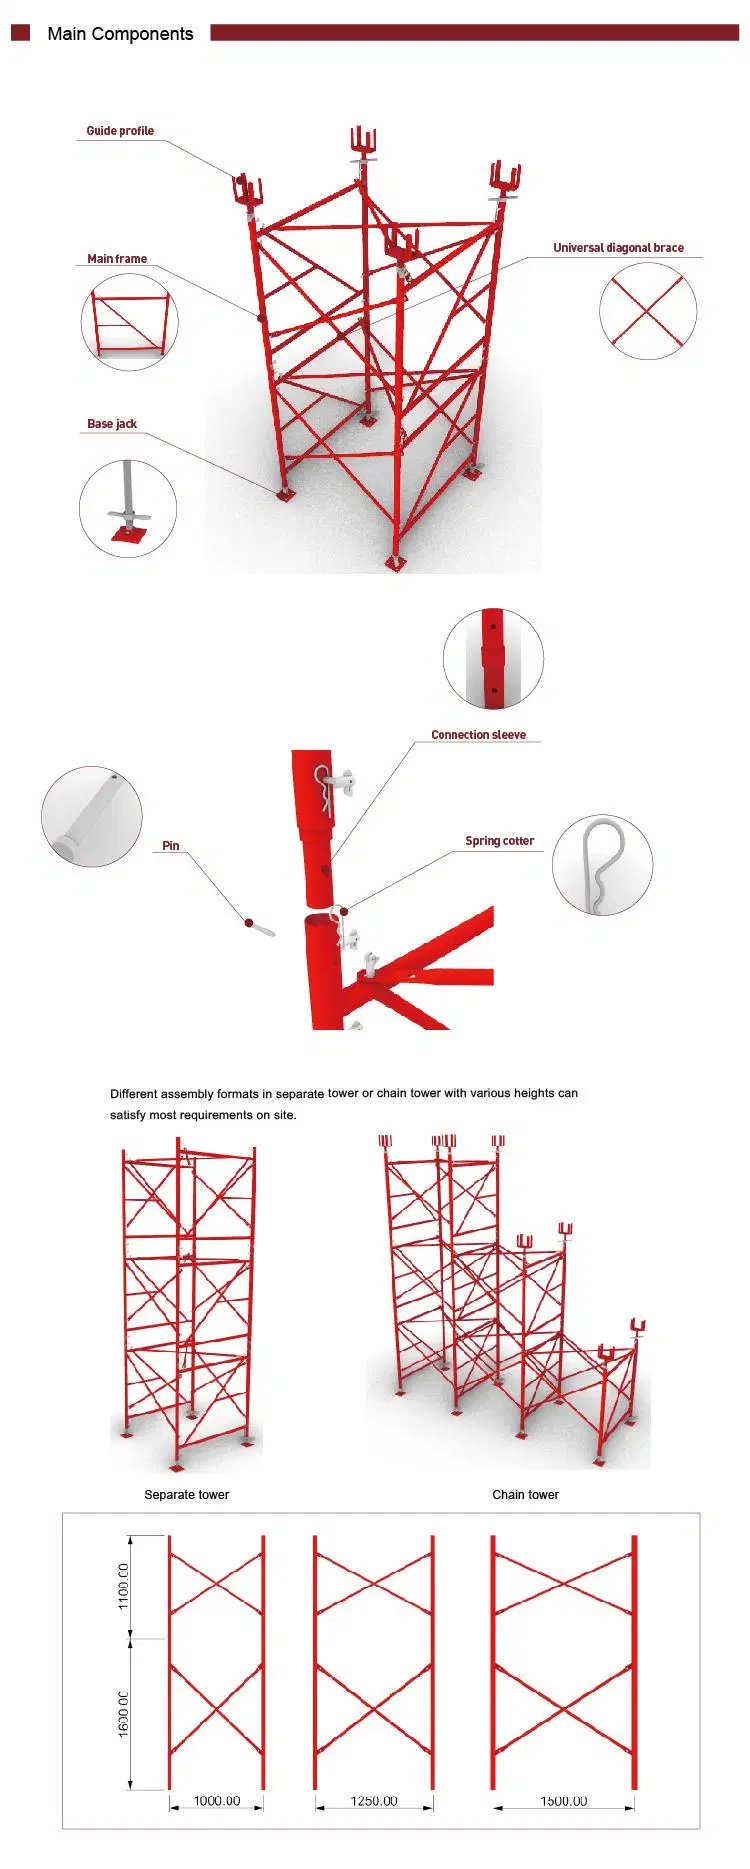 Tecon Shoring Tower Construction Scaffolding for Highway Bridge and Tunnel Project